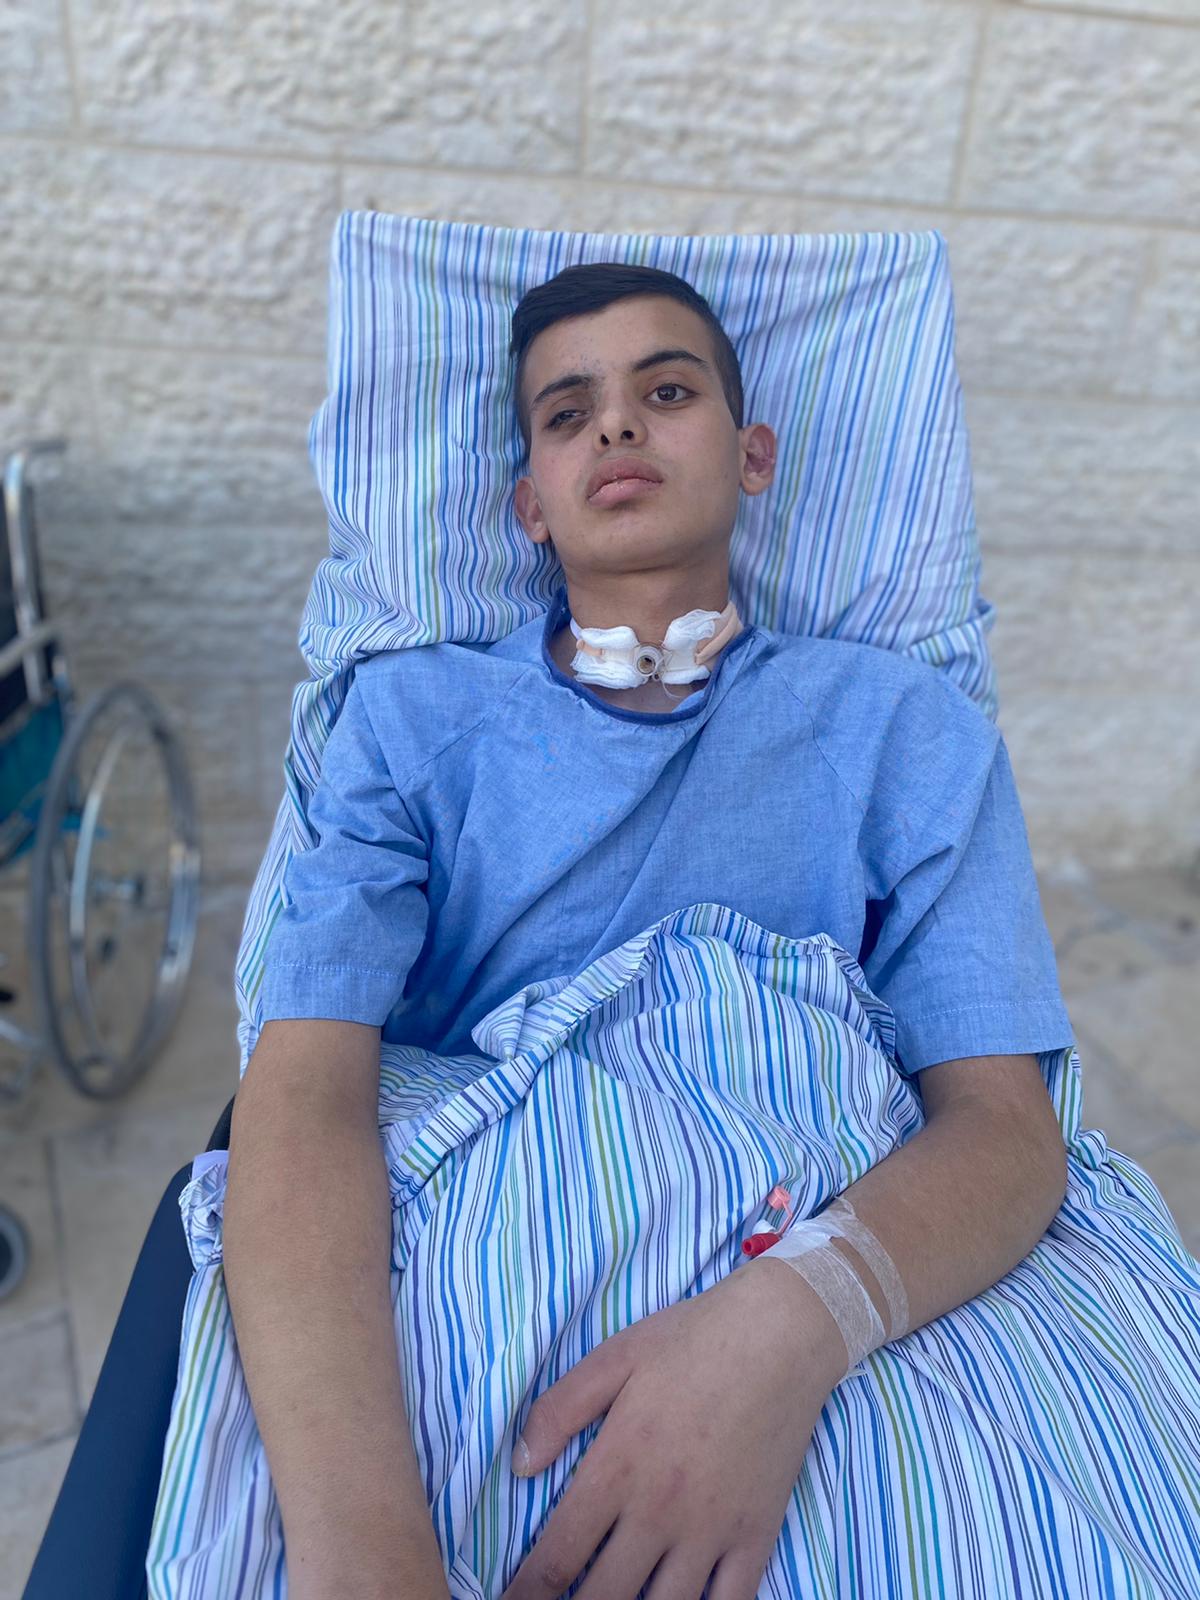 16-year-old Ashraf Mahmoud Najeeb Farahti remains in the intensive care unit after Israeli forces shot him in the right eye. (Photo: Courtesy of the Farahti family)